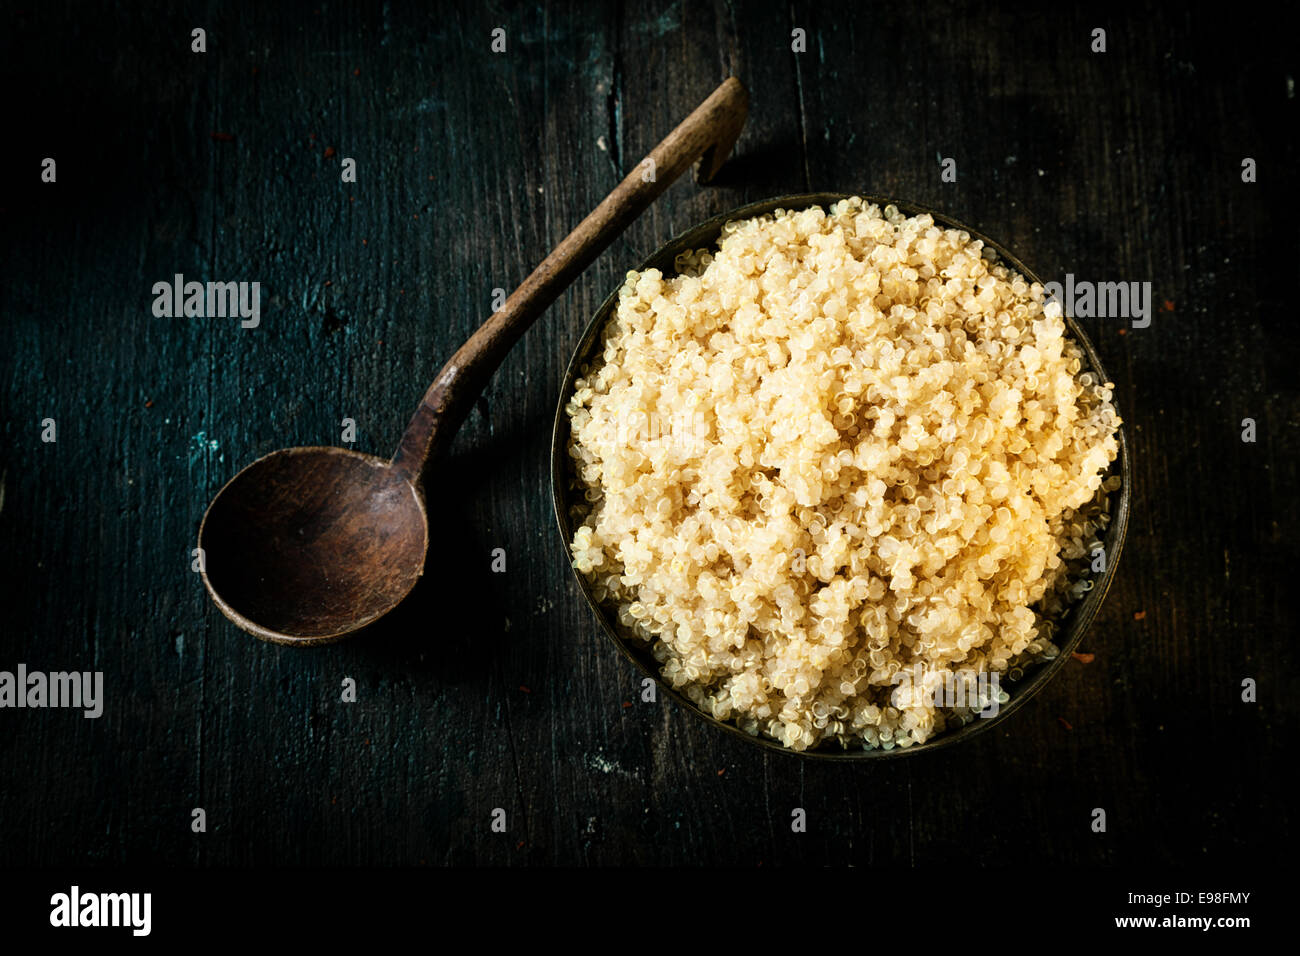 Overhead view of a bowl of delicious healthy quinoa made from the seeds of the goosefoot plant and classed as a superfood for its high protein and nutritional value on a dark background Stock Photo